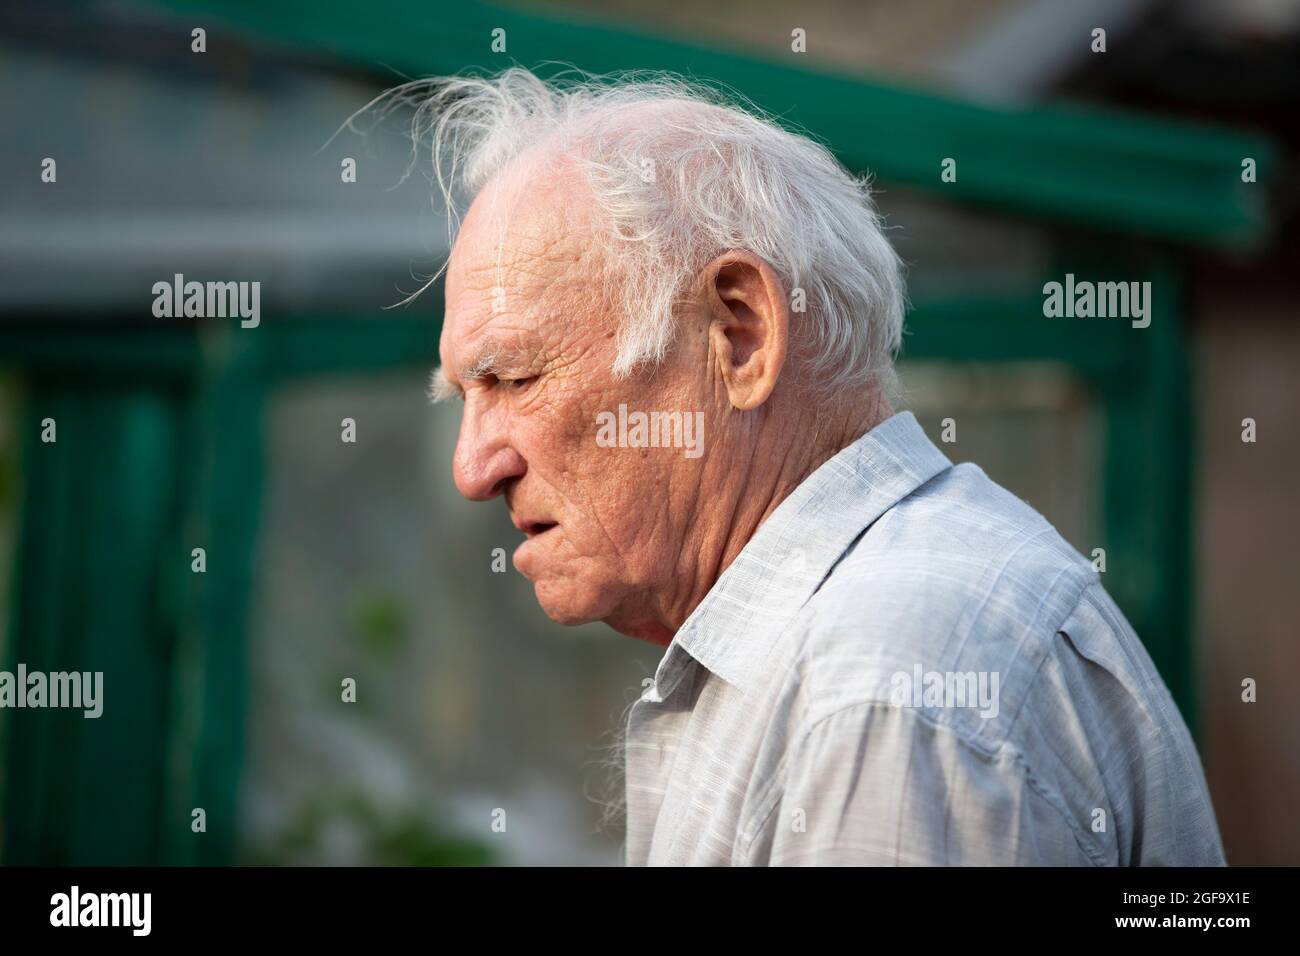 An old gray-haired man with a concerned face and wrinkles in profile. Stock Photo